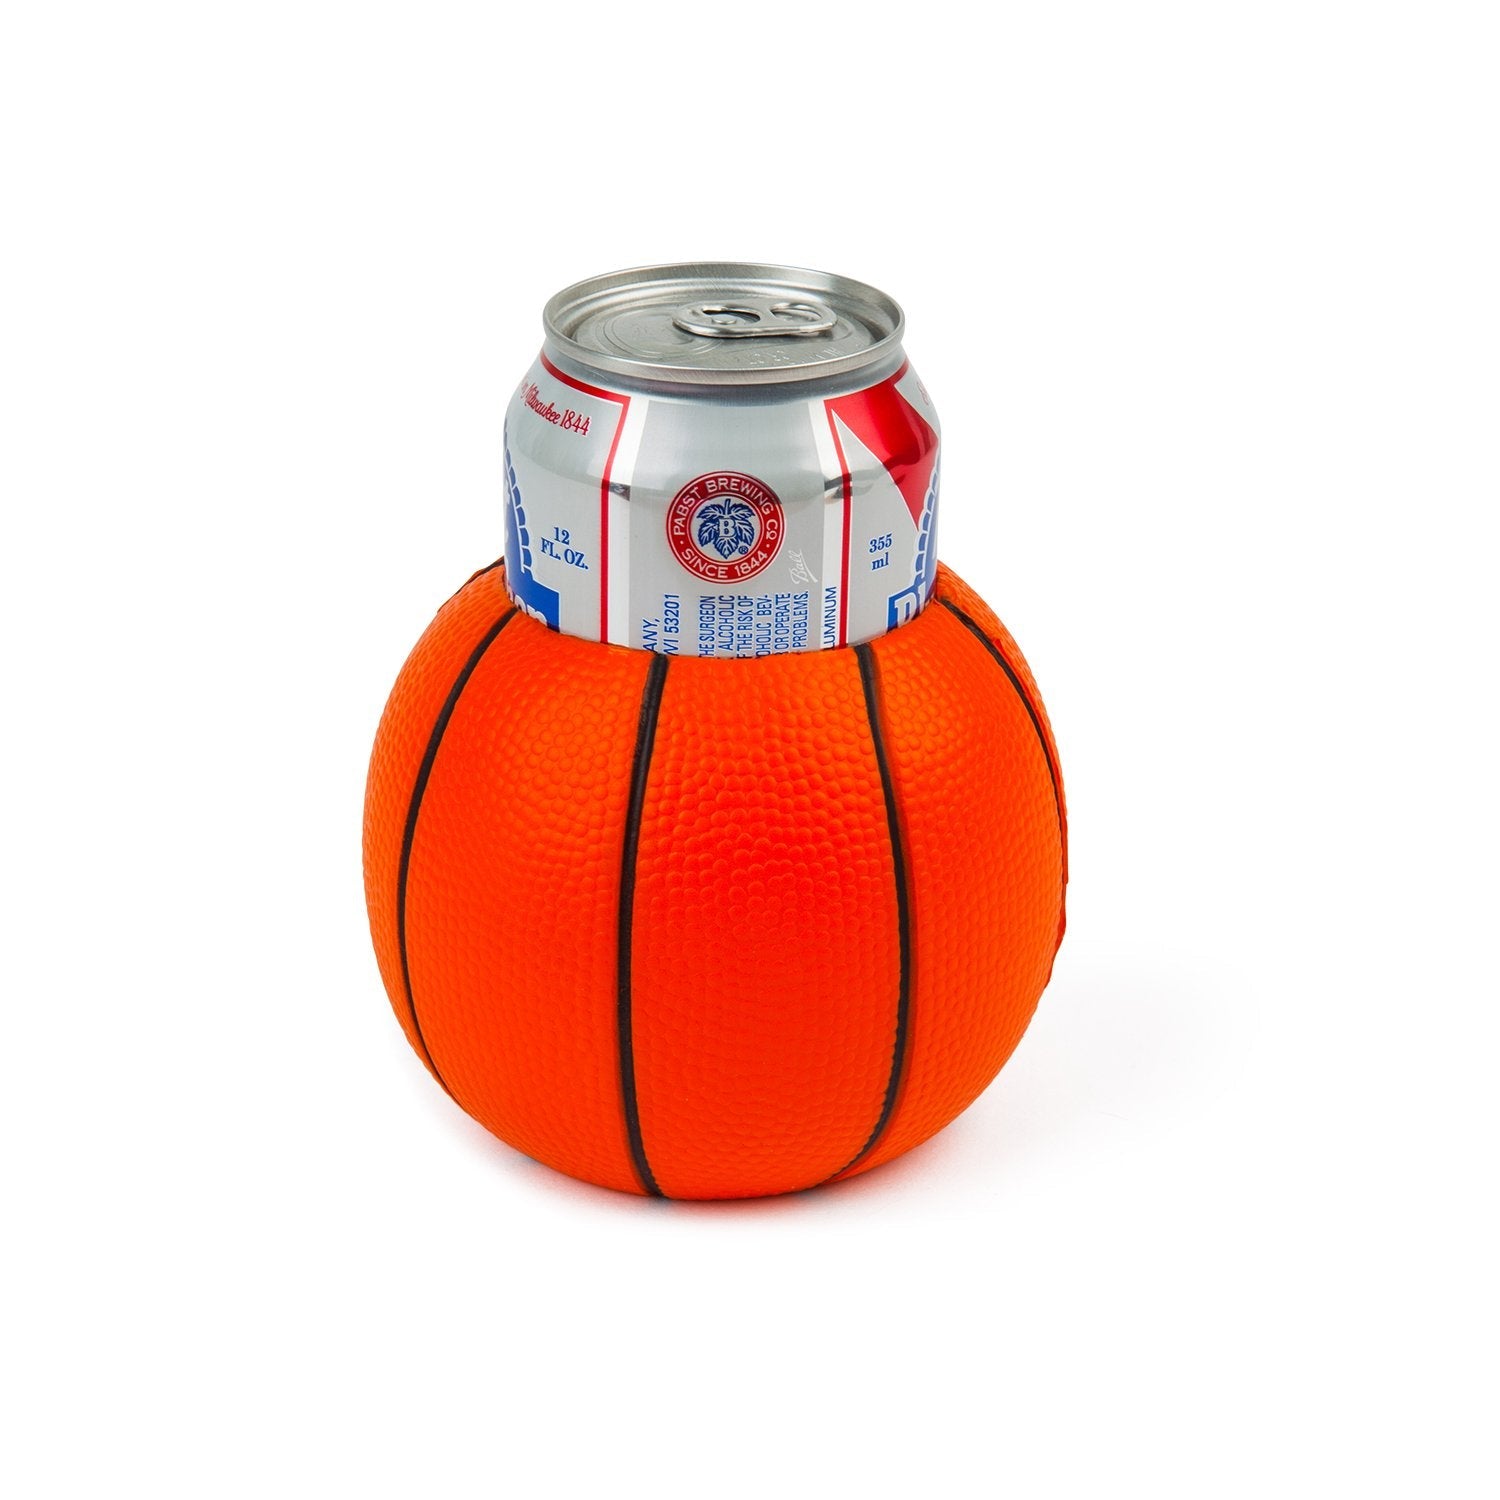 Basketball Material Can Cooler Drink Holder for Can or Bottle